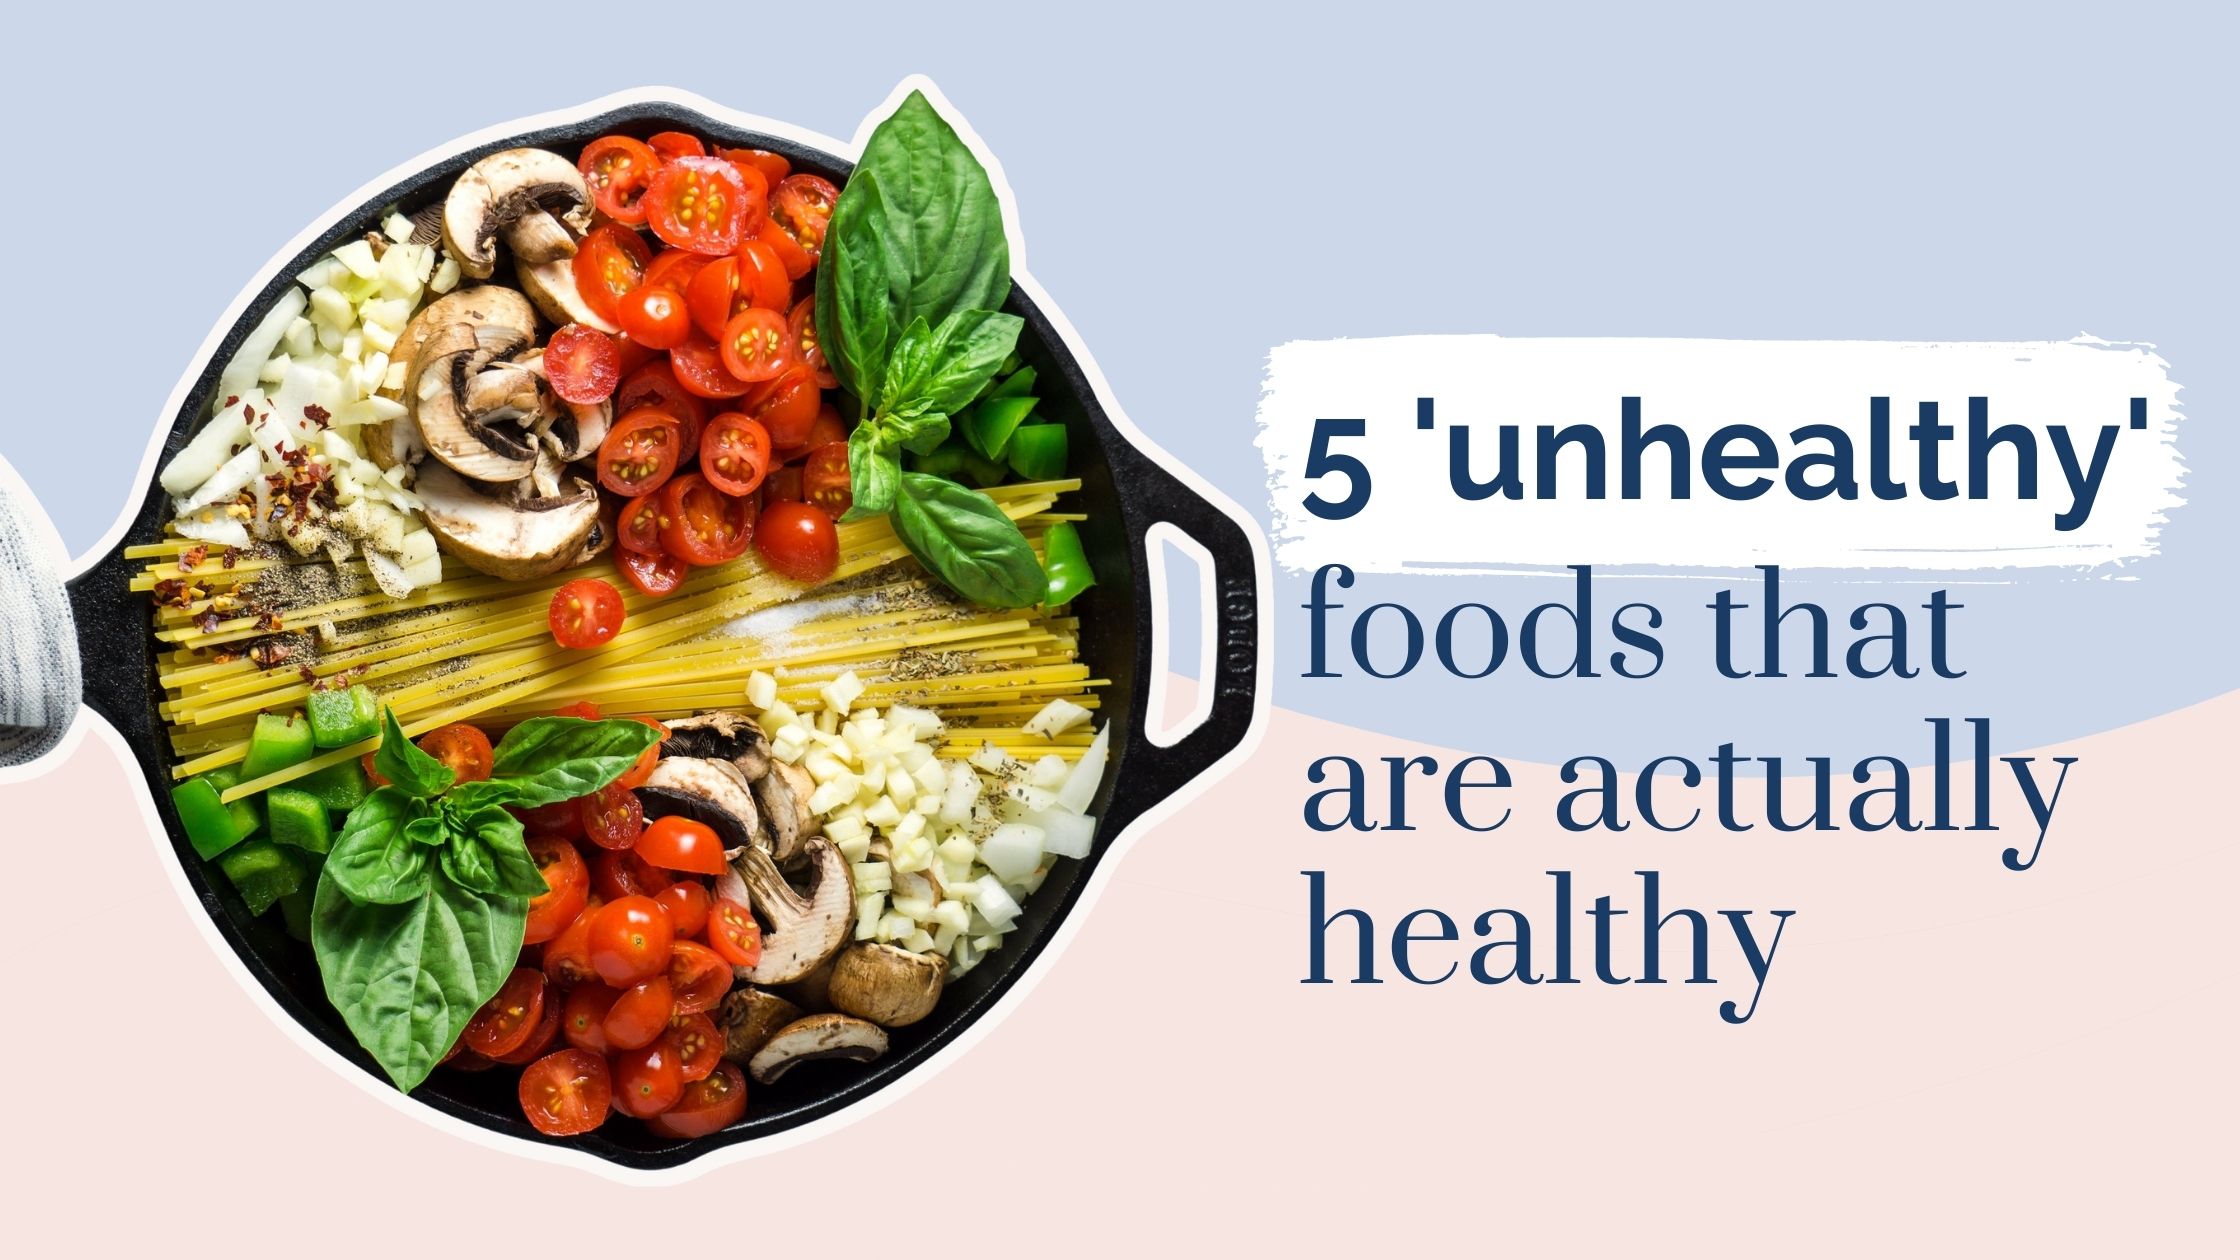 5 ‘unhealthy’ foods that are actually healthy